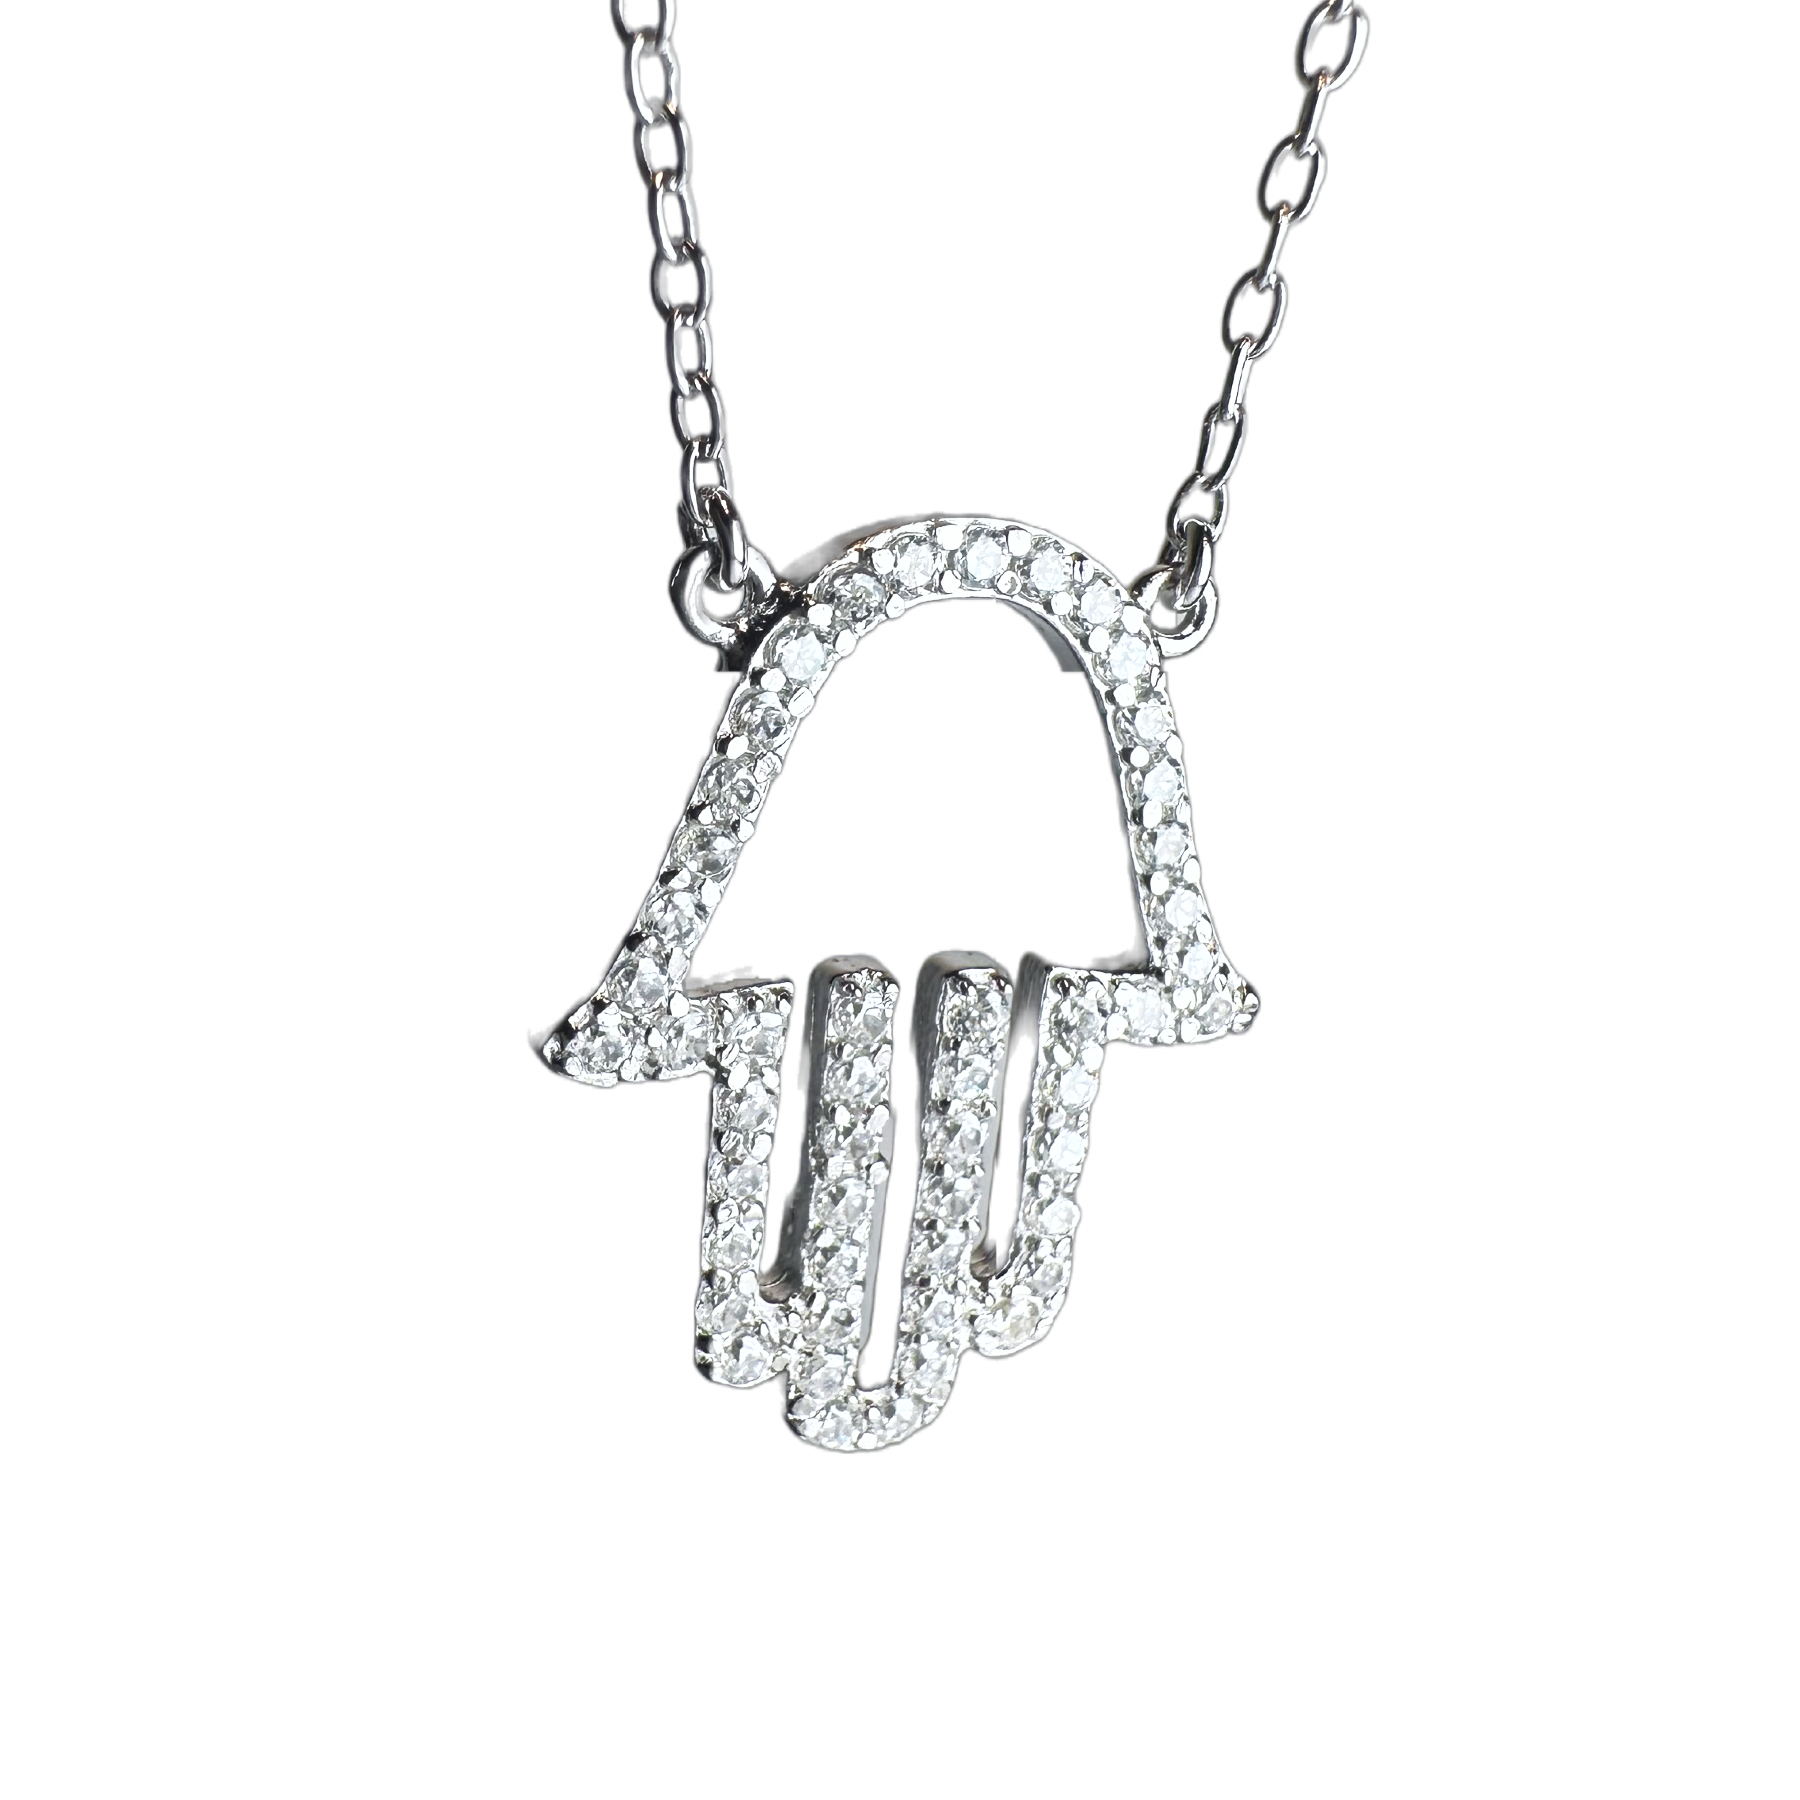 "Hand of Glam" Gold-Dipped Hamsa CZ Necklace